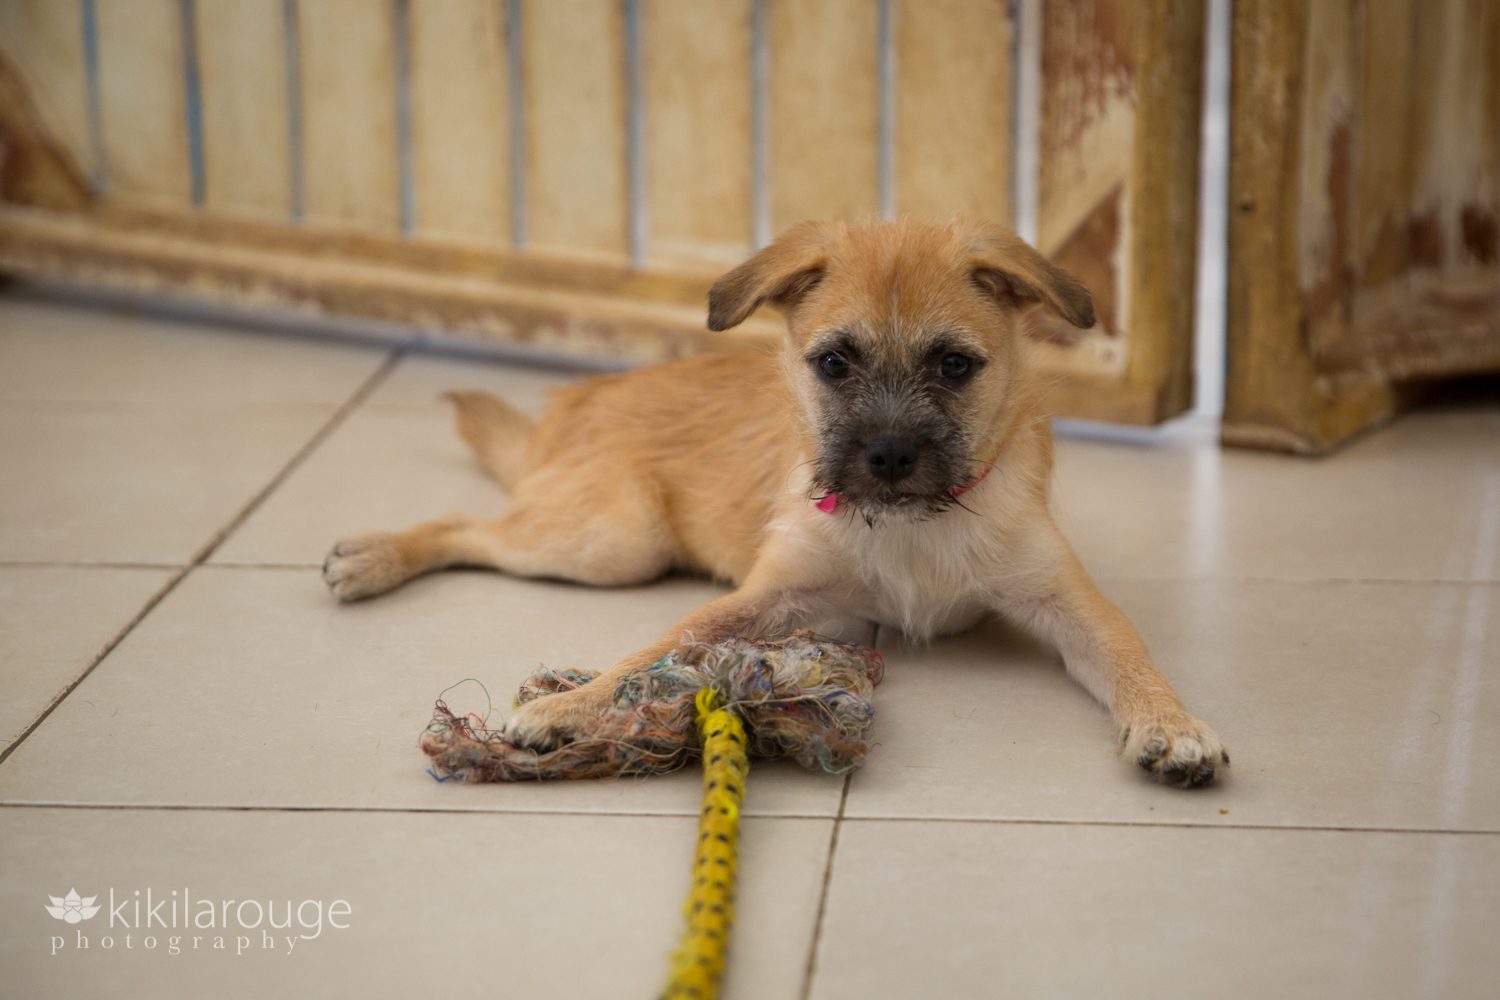 Cute scruffy puppy with rope toy at animal shelter